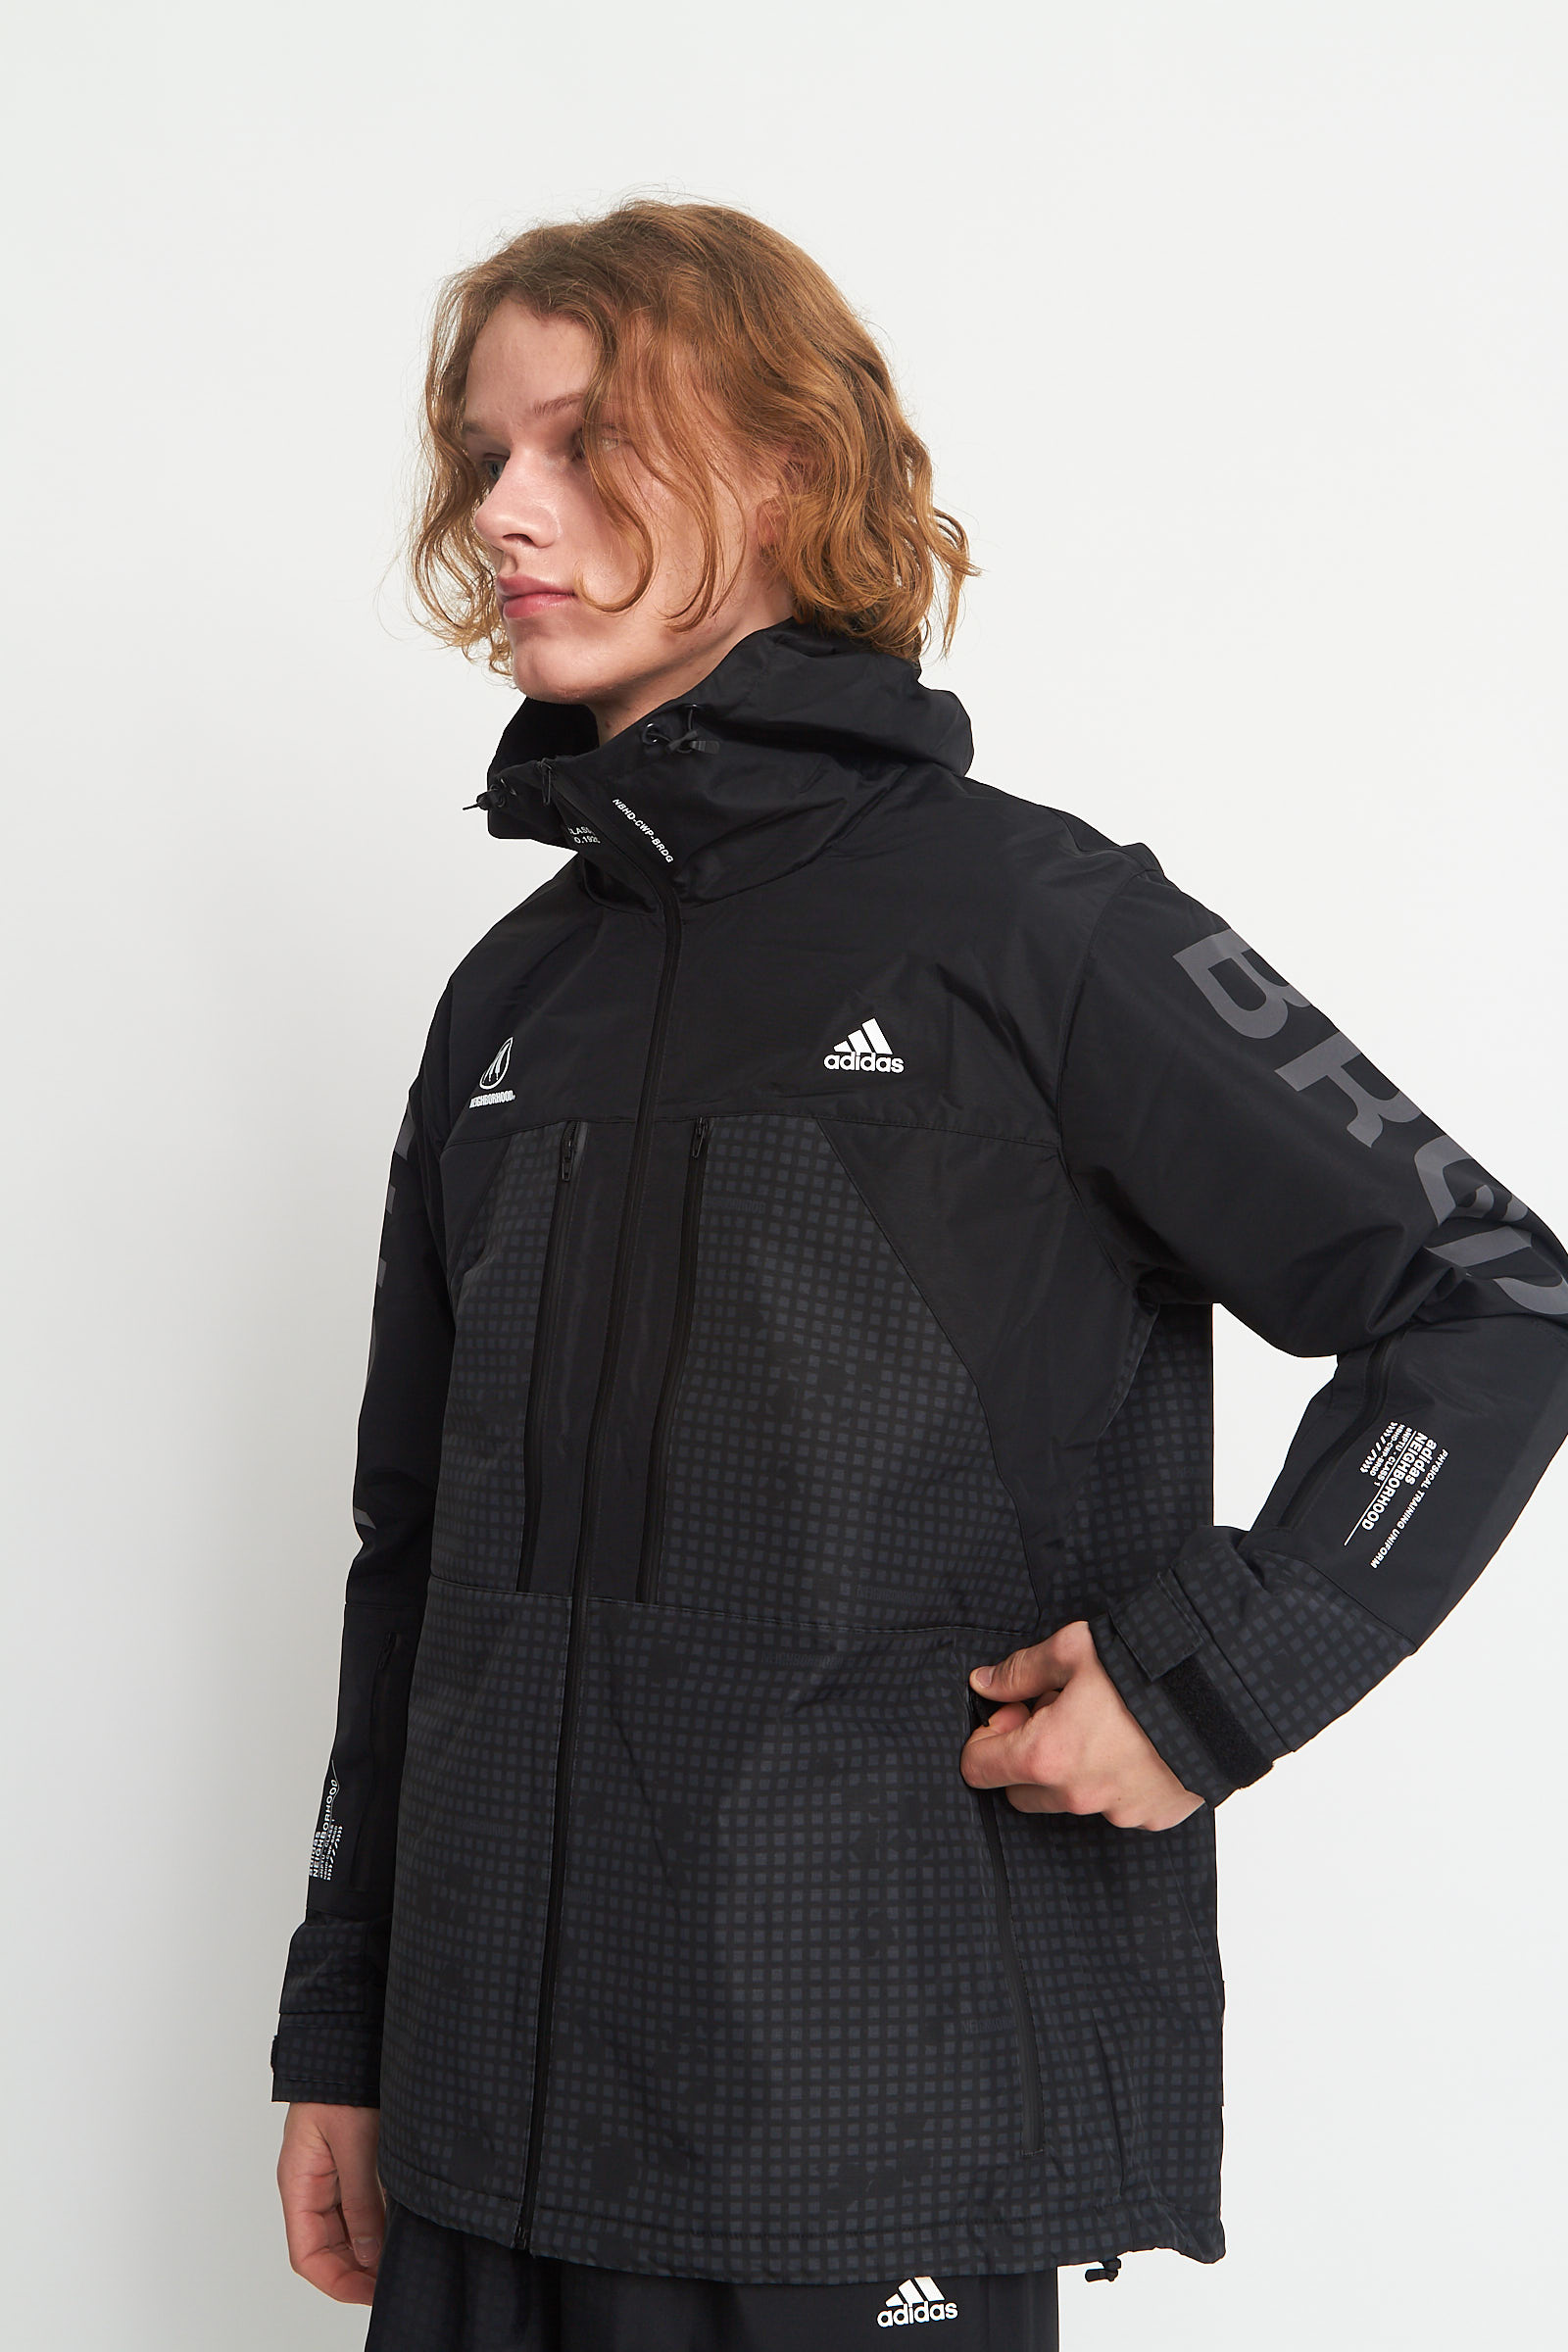 adidas jacket new collection